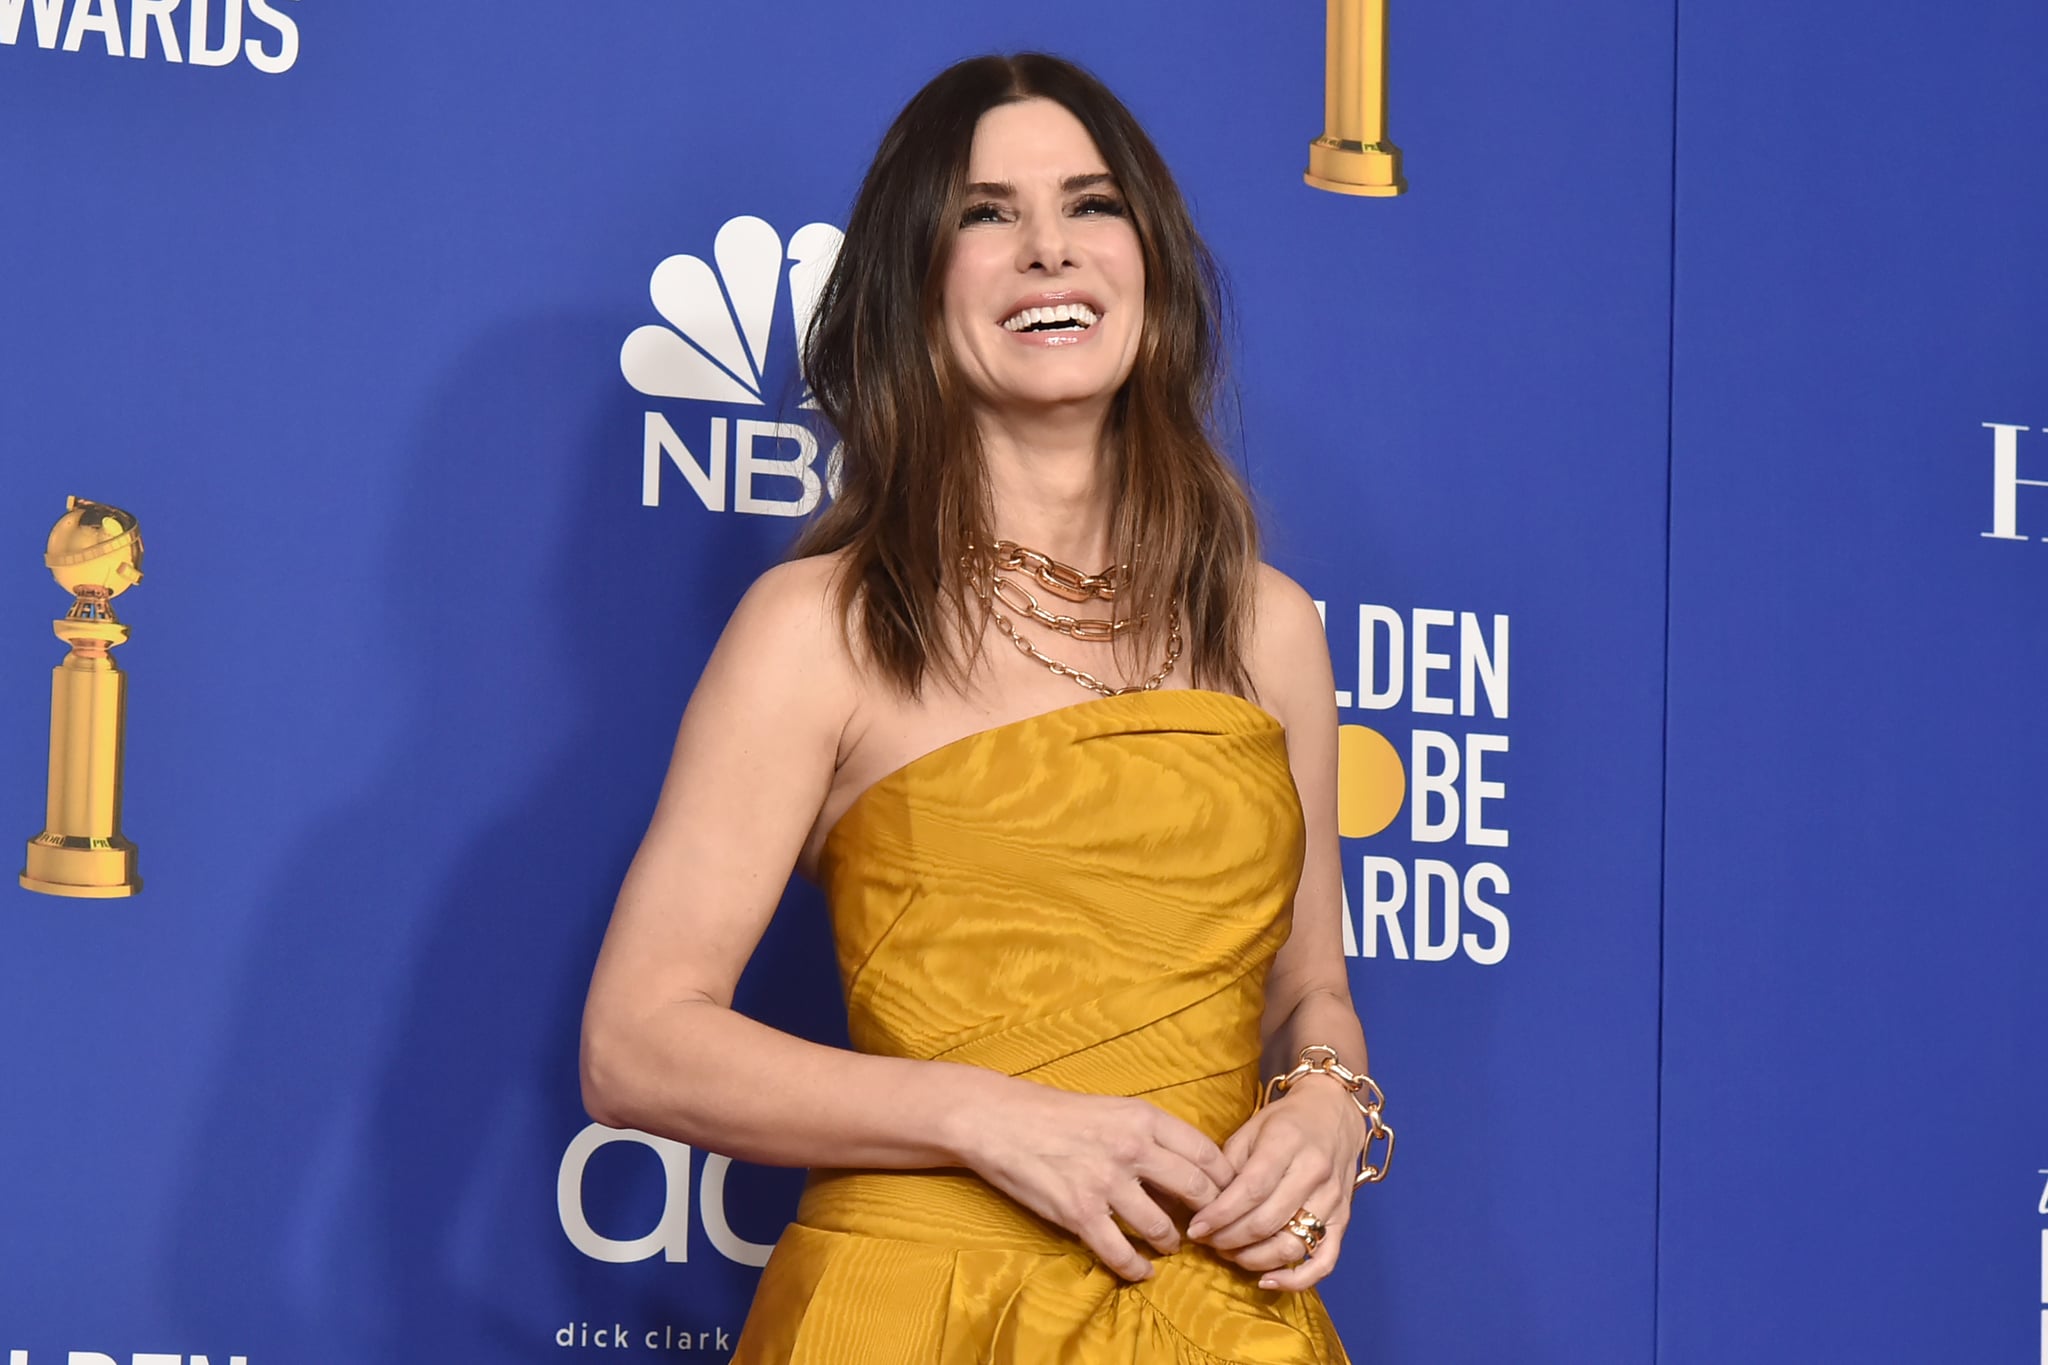 BEVERLY HILLS, CALIFORNIA - JANUARY 05: Sandra Bullock attends The 77th Golden Globes Awards - Press Room at The Beverly Hilton Hotel on January 05, 2020 in Beverly Hills, California. (Photo by David Crotty/Patrick McMullan via Getty Images)